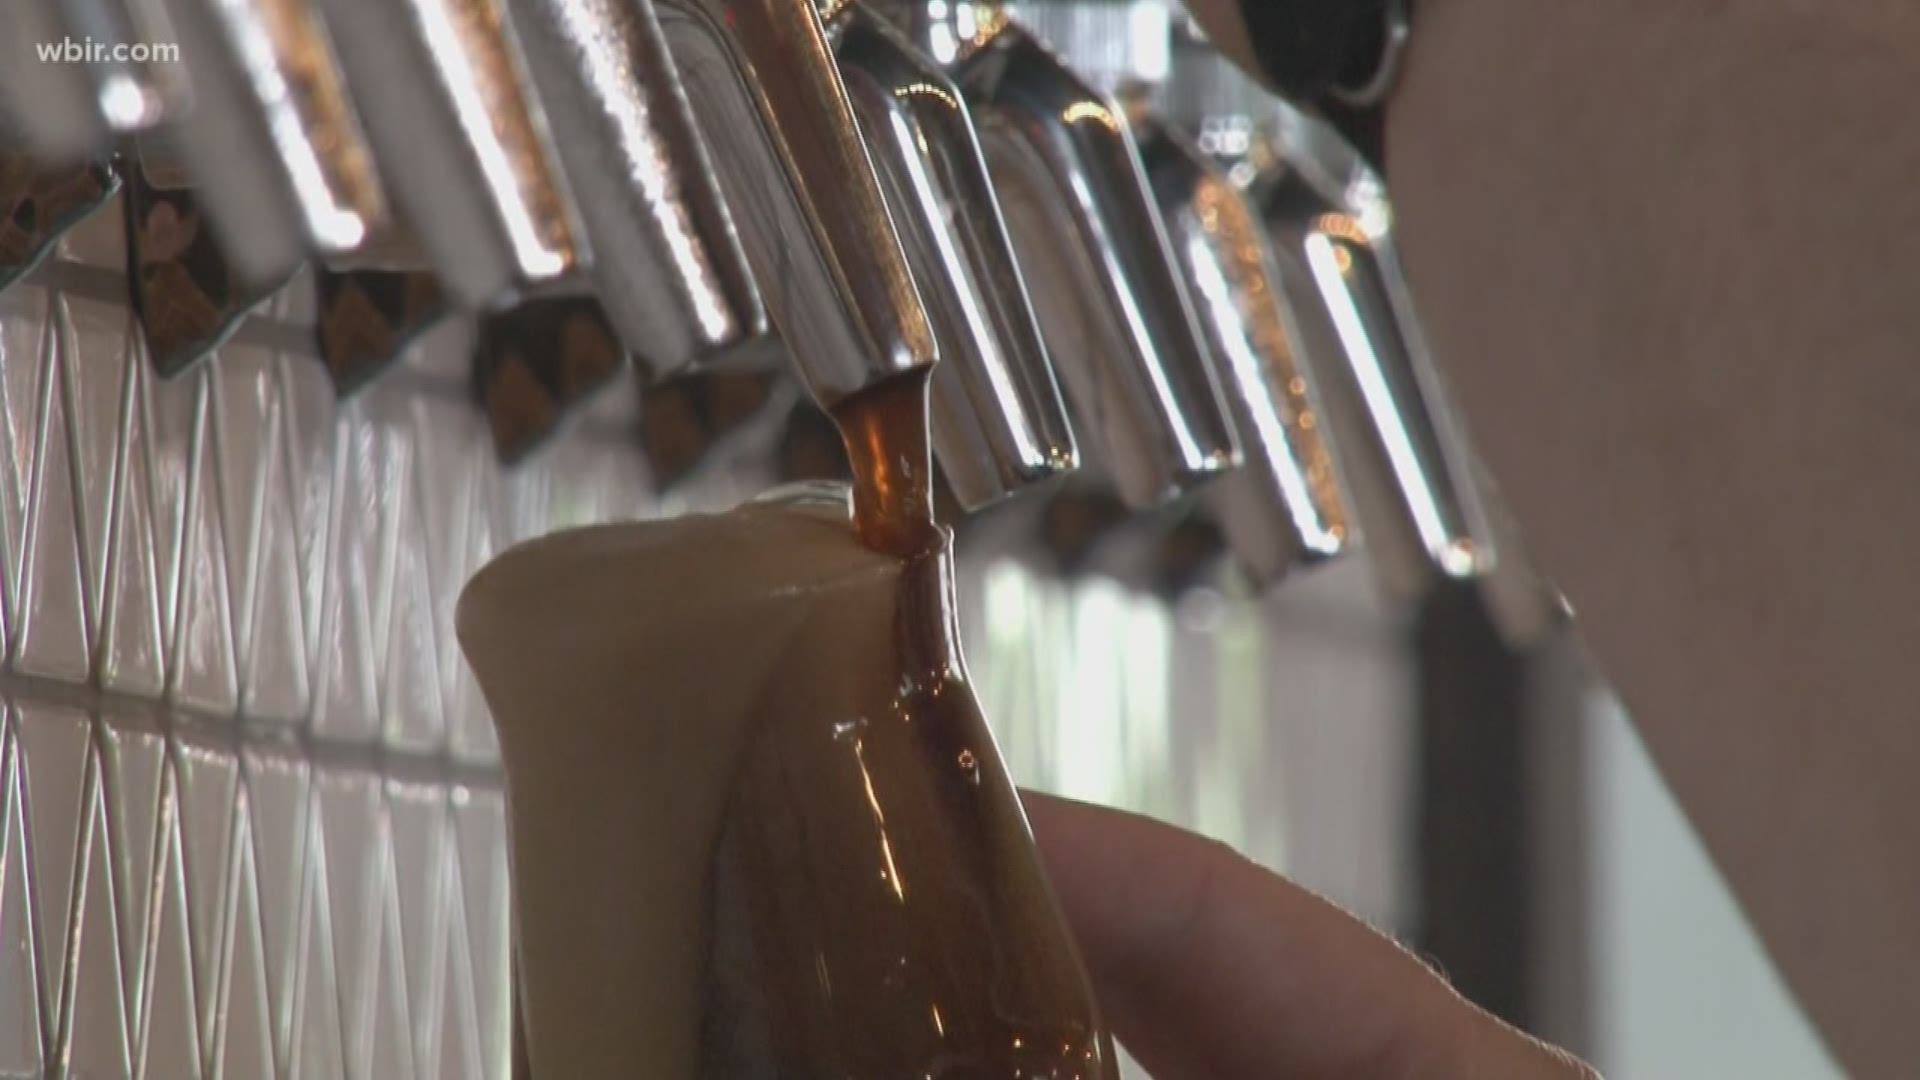 In East Tennessee -- the beer industry made jobs for nearly 9,500 people last year. That's everyone from brewers and bar tenders, to farmers and construction workers.